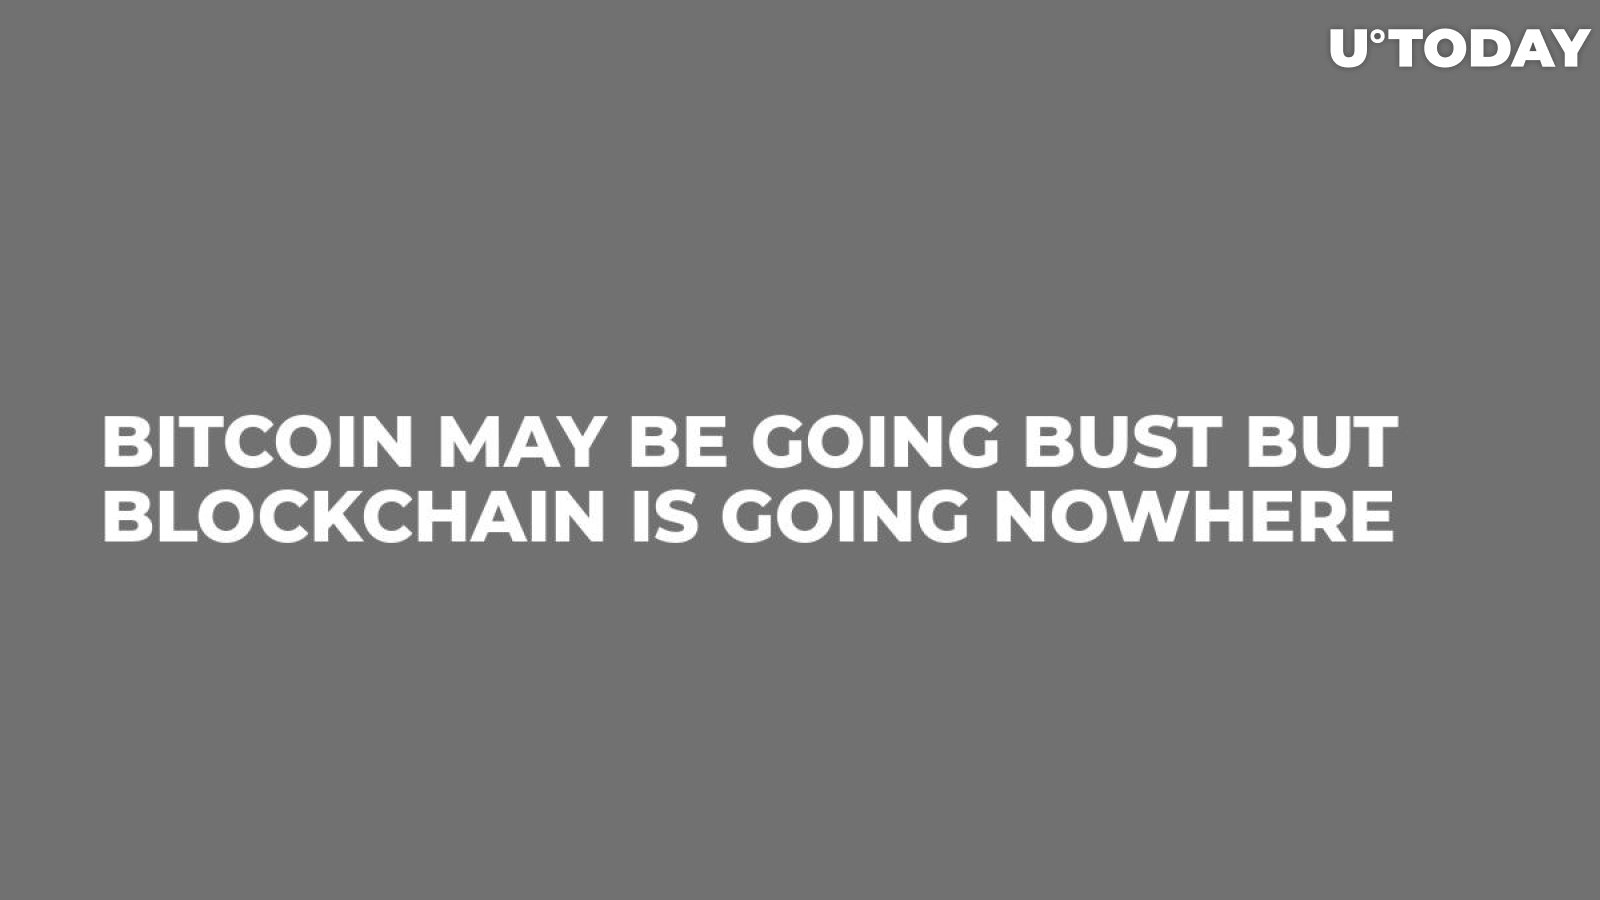 Bitcoin May Be Going Bust But Blockchain is Going Nowhere